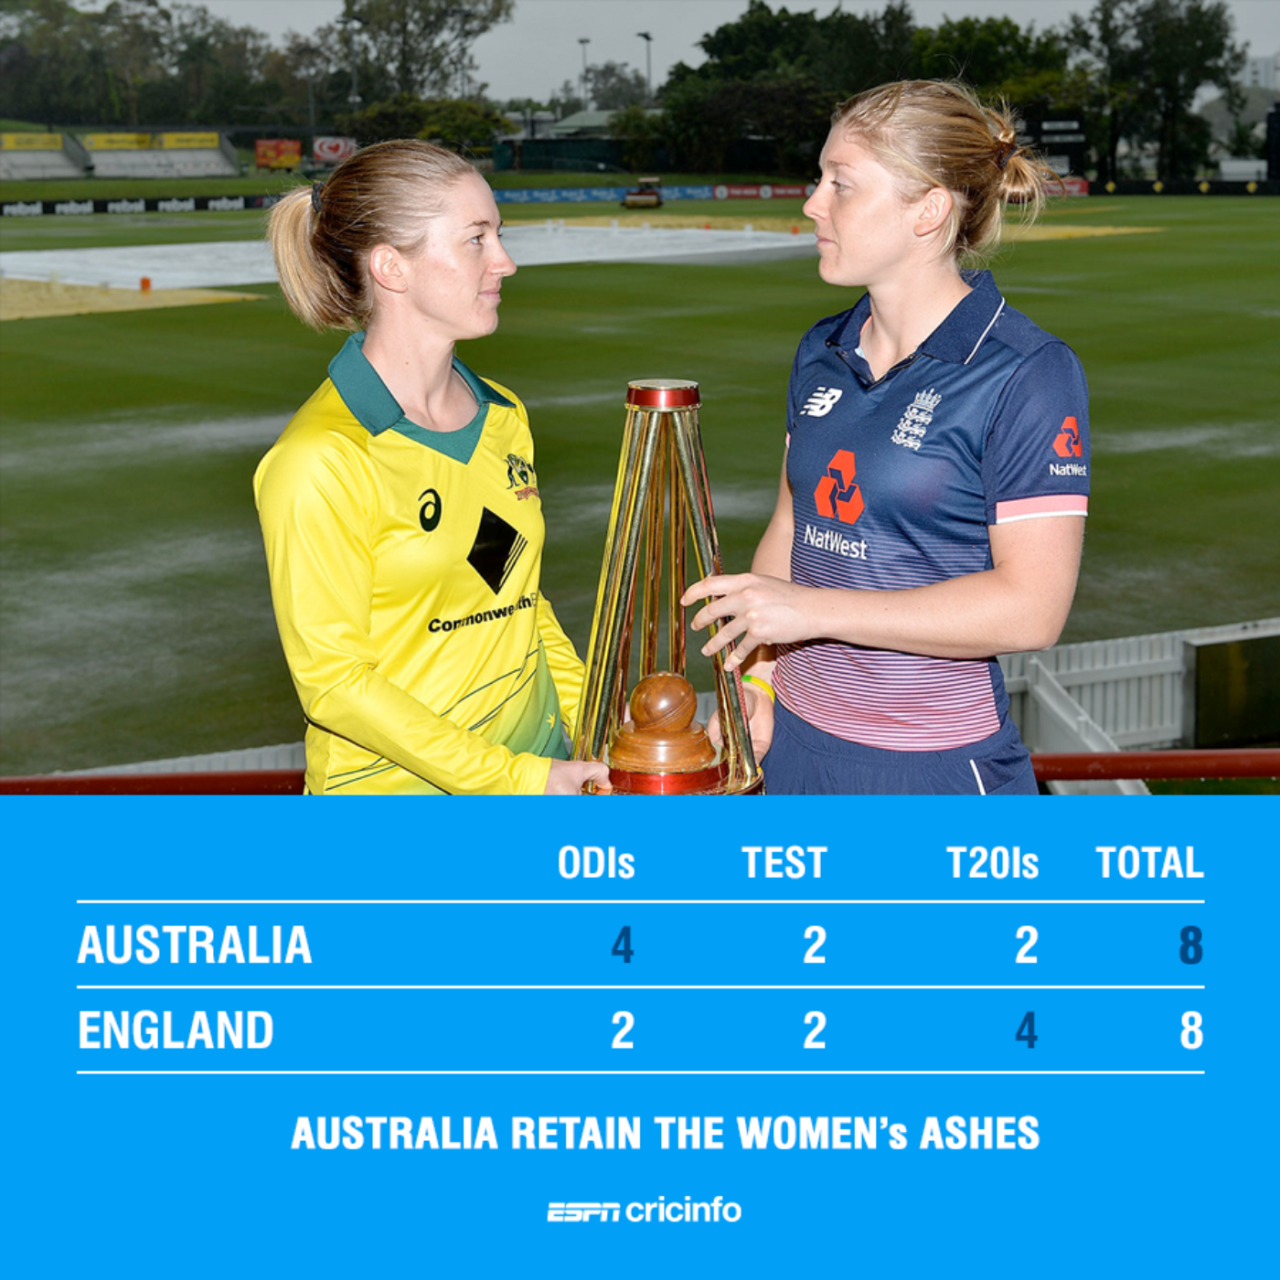 The final scoreline of the Women's Ashes series